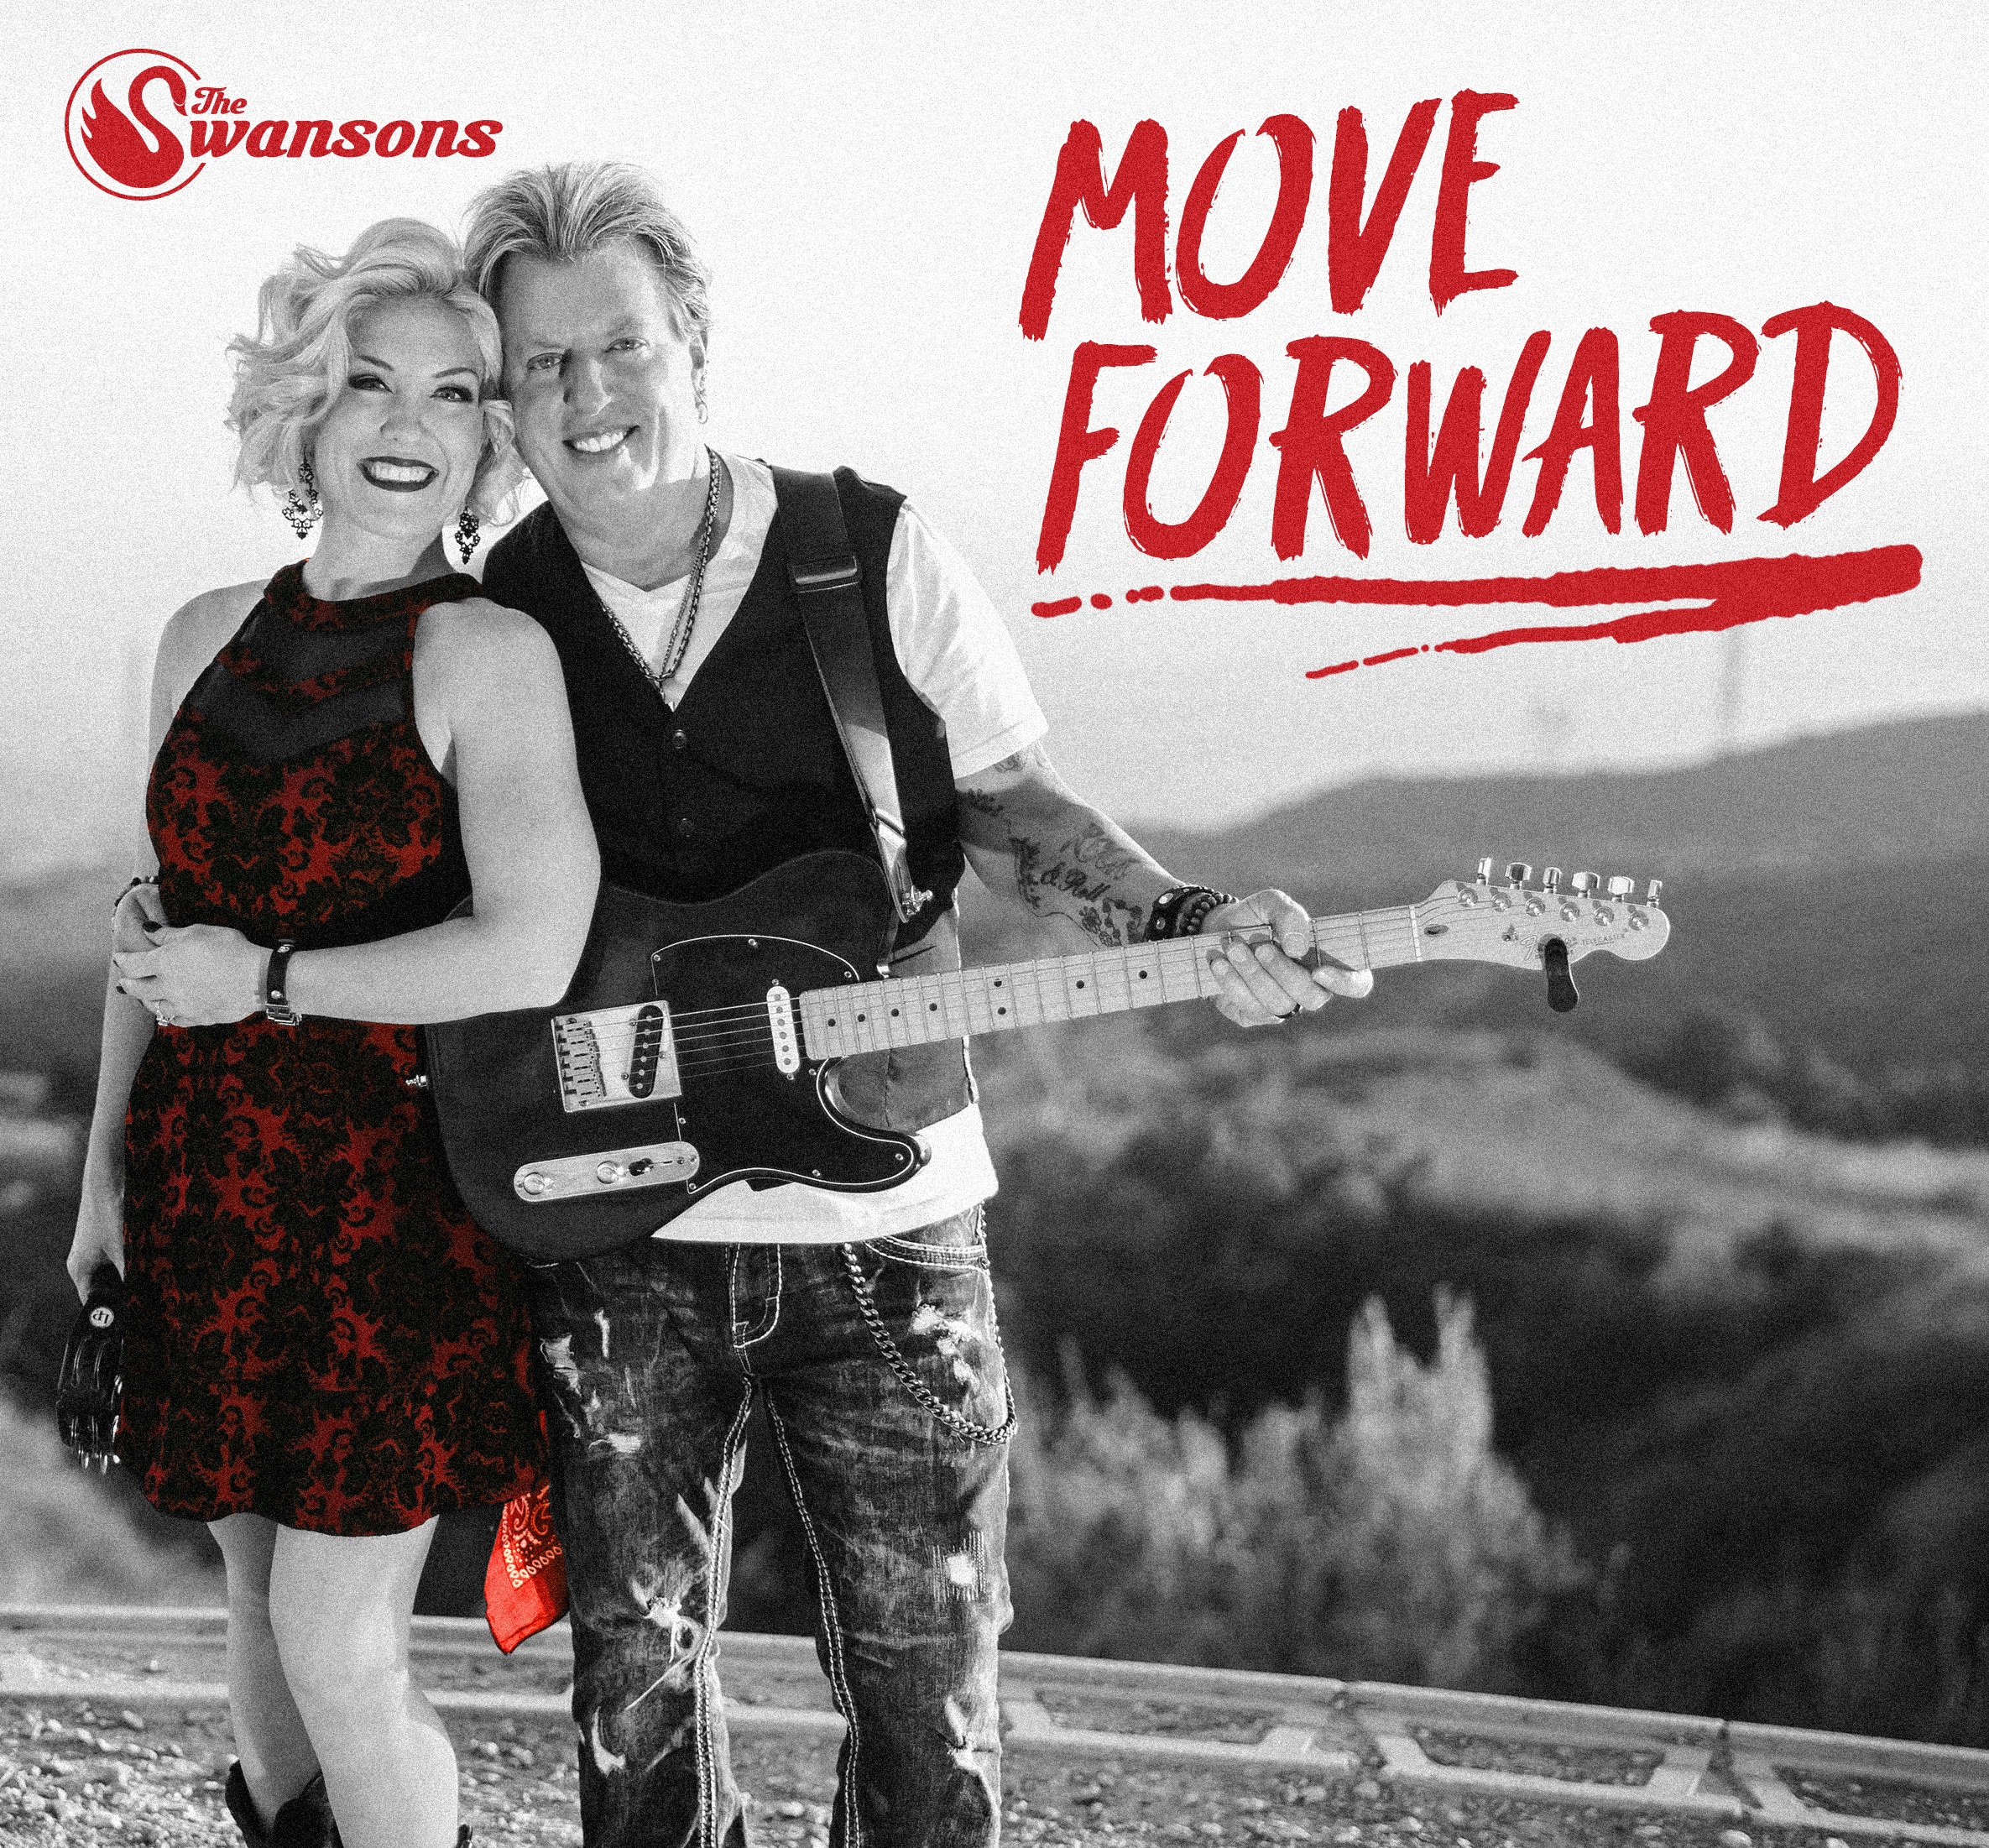 The Swansons New Video “Move Forward,”  To watch visit YouTube